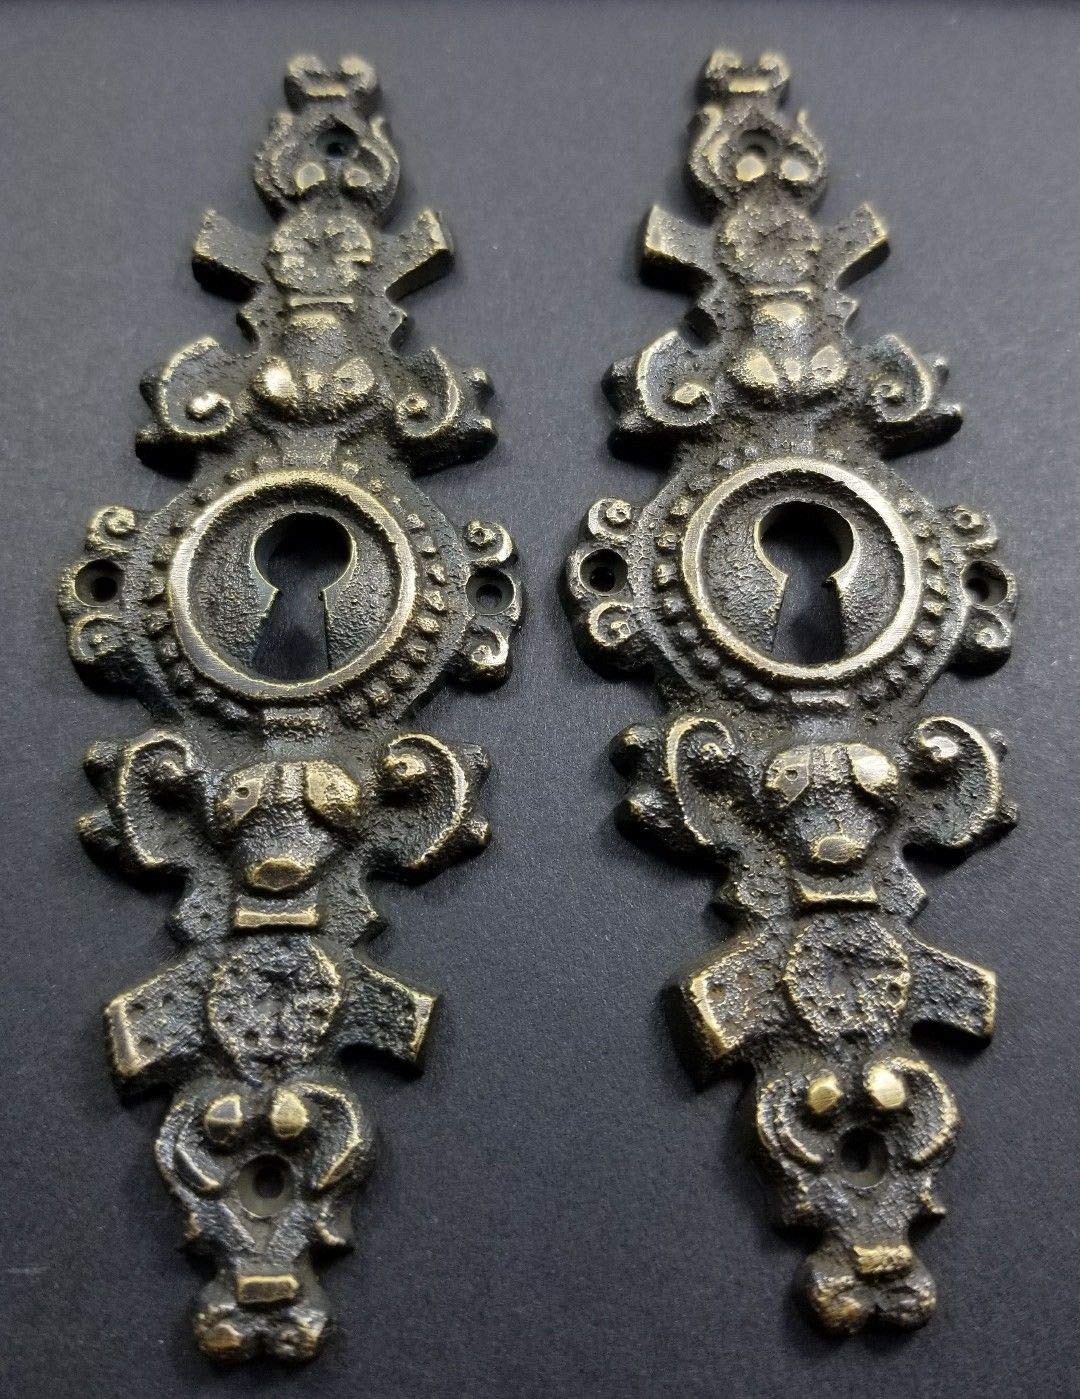 2 VTG. Antique Style French Escutcheons Key Hole Cover 4-1/4" Jewelry Component Part #E19